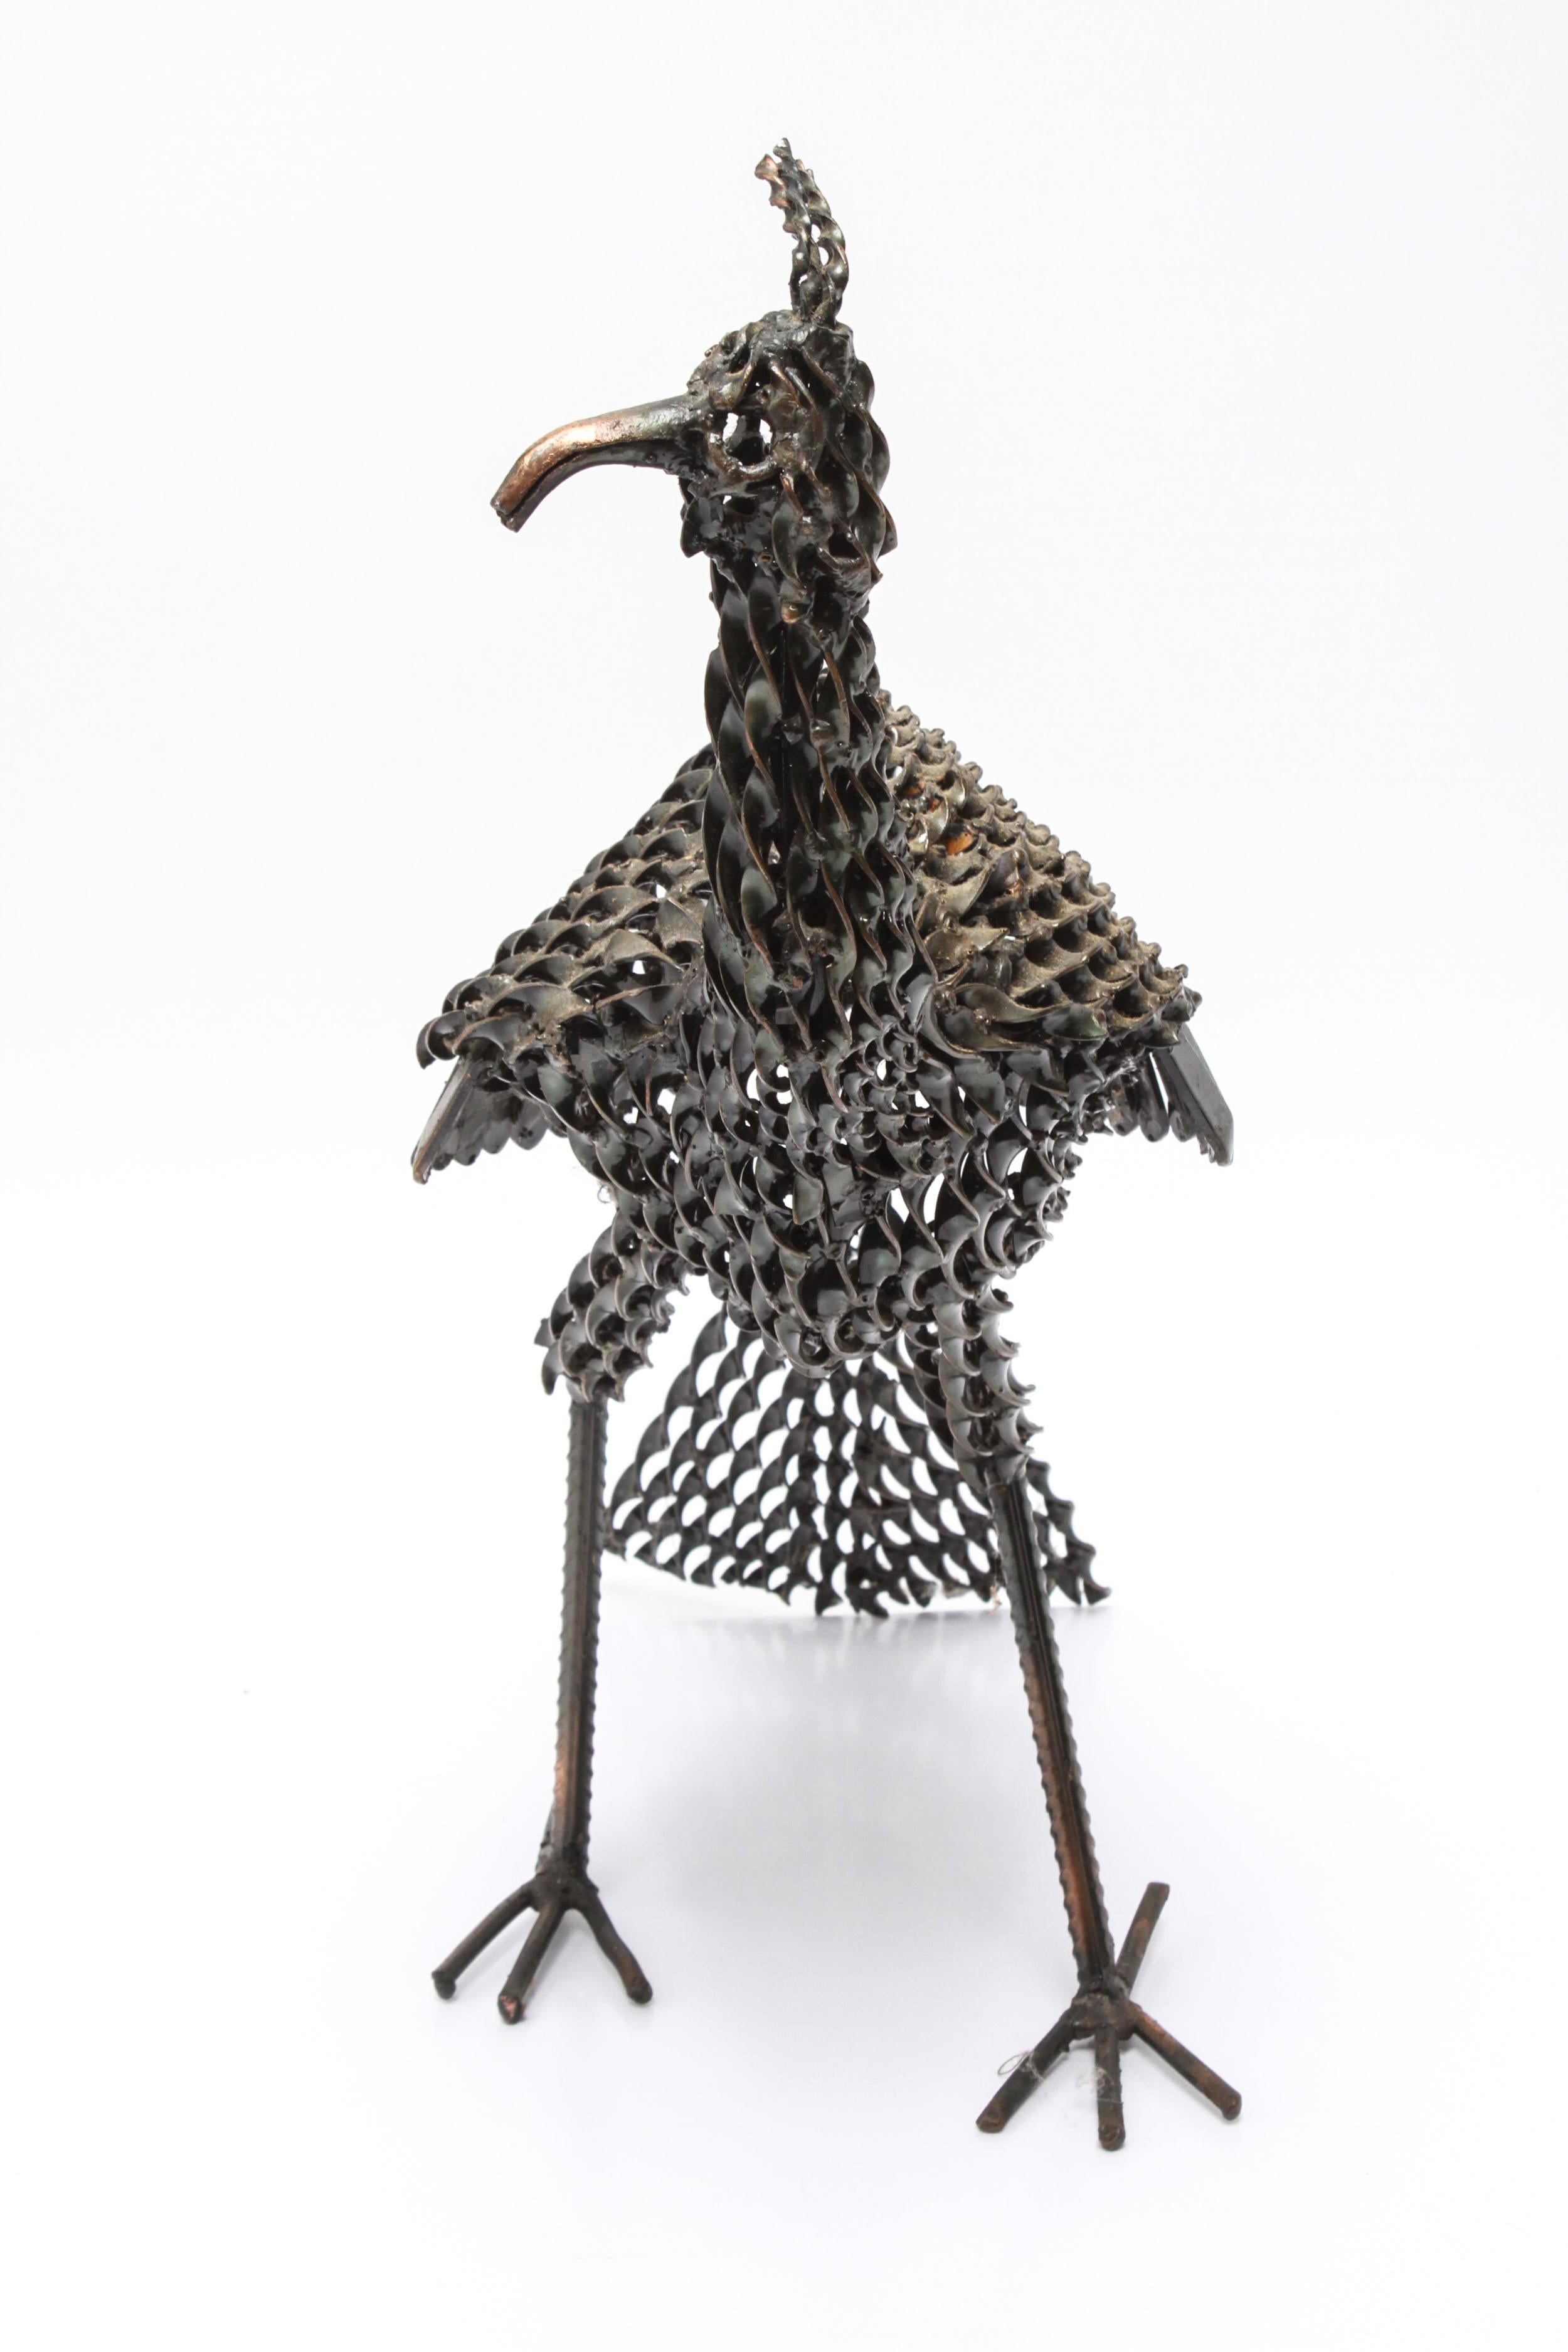 Modern Brutalist twisted metal sculpture of a stylized peacock or peahen bird. The piece is made with elements of twisted metal. In great vintage condition with age-appropriate wear and use.